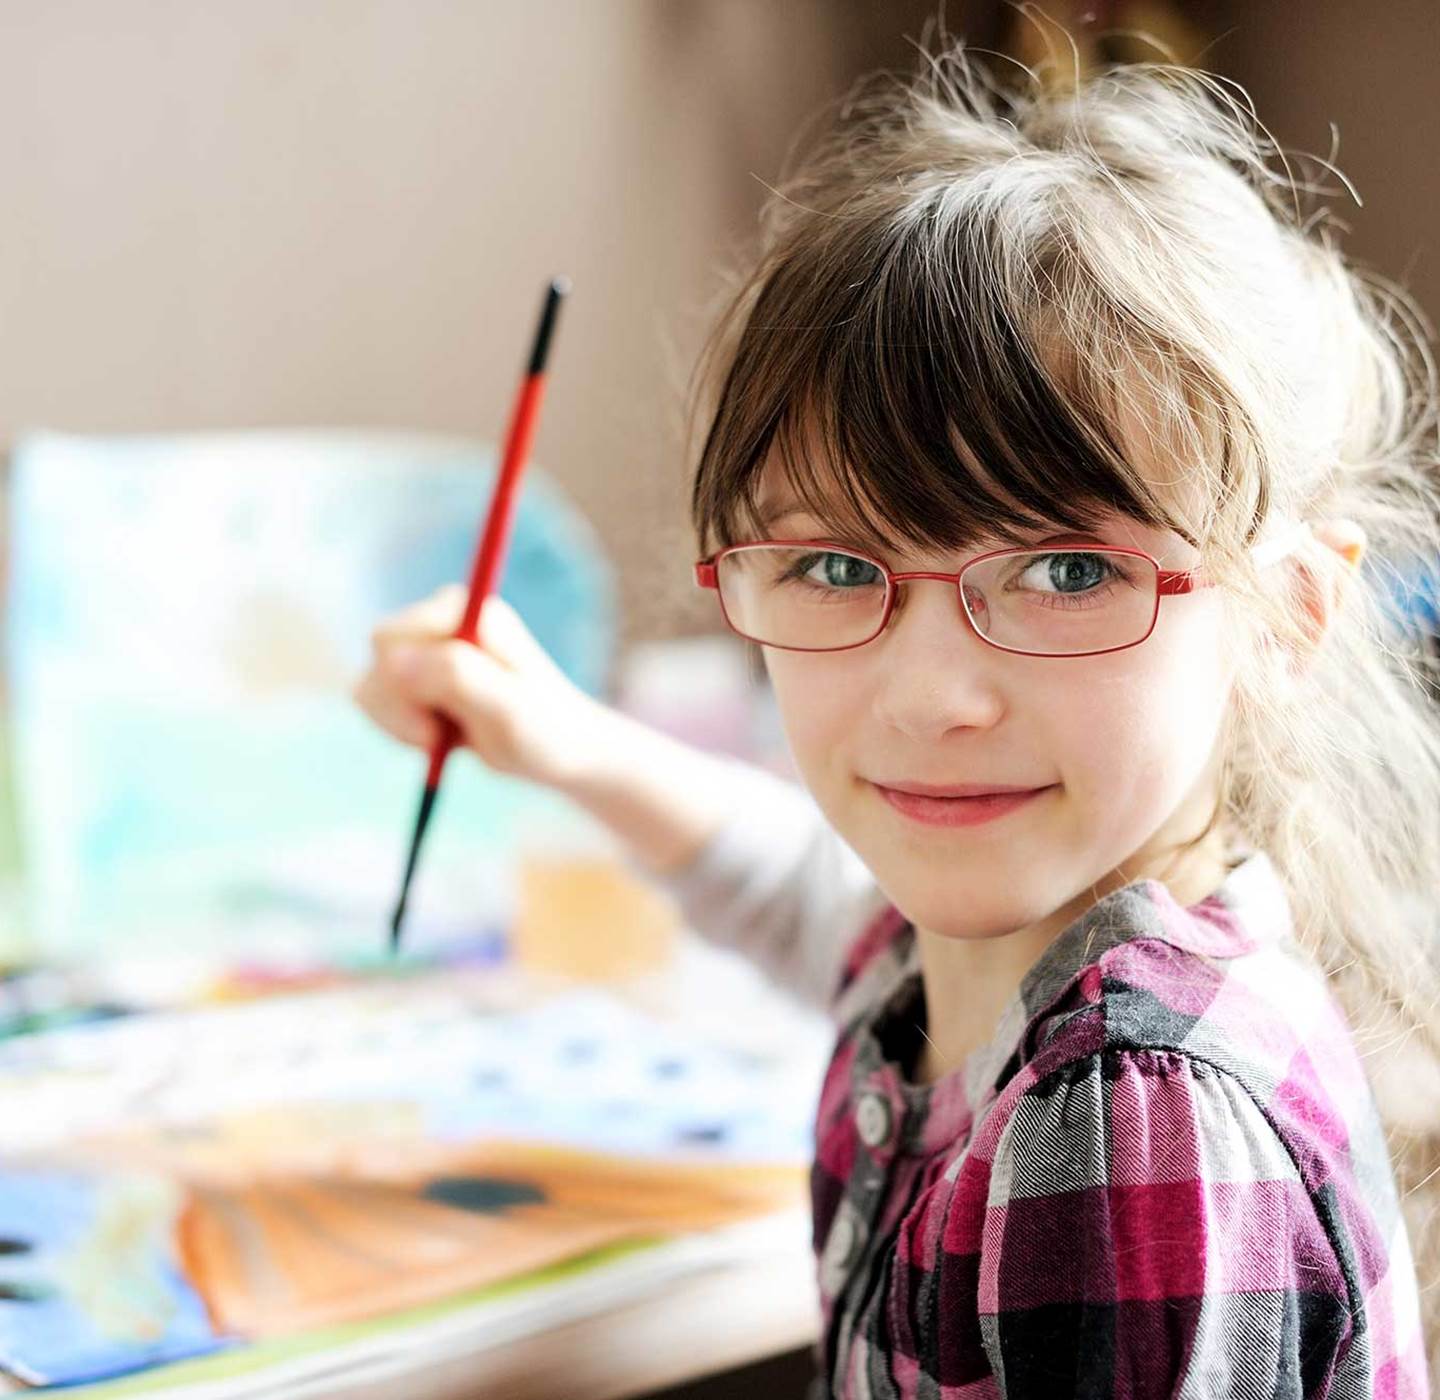 A young girl painting.